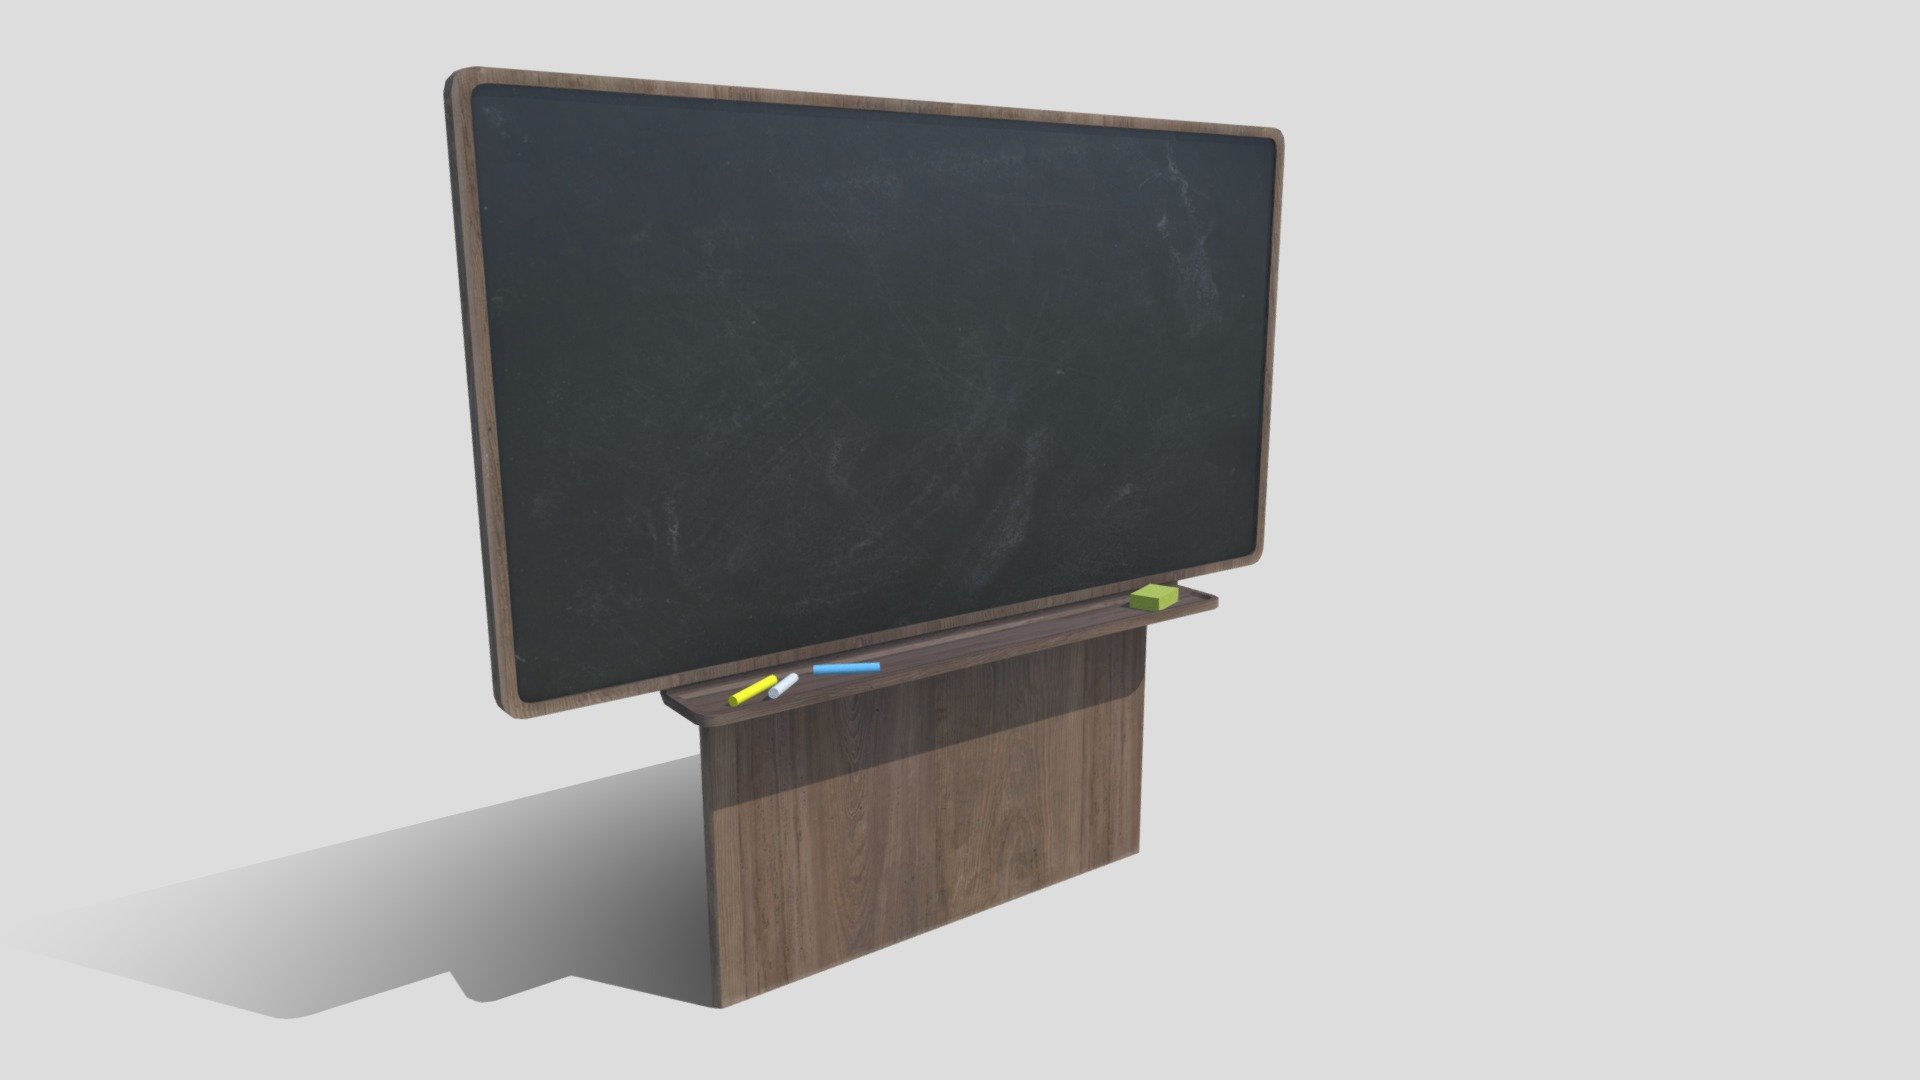 A Chalk Board for a school or university setting.

Chalk Board Model + Texture

Some chalk, as well as a sponge as props.

Check out our bundles, we have more fitting models for each setting 3d model